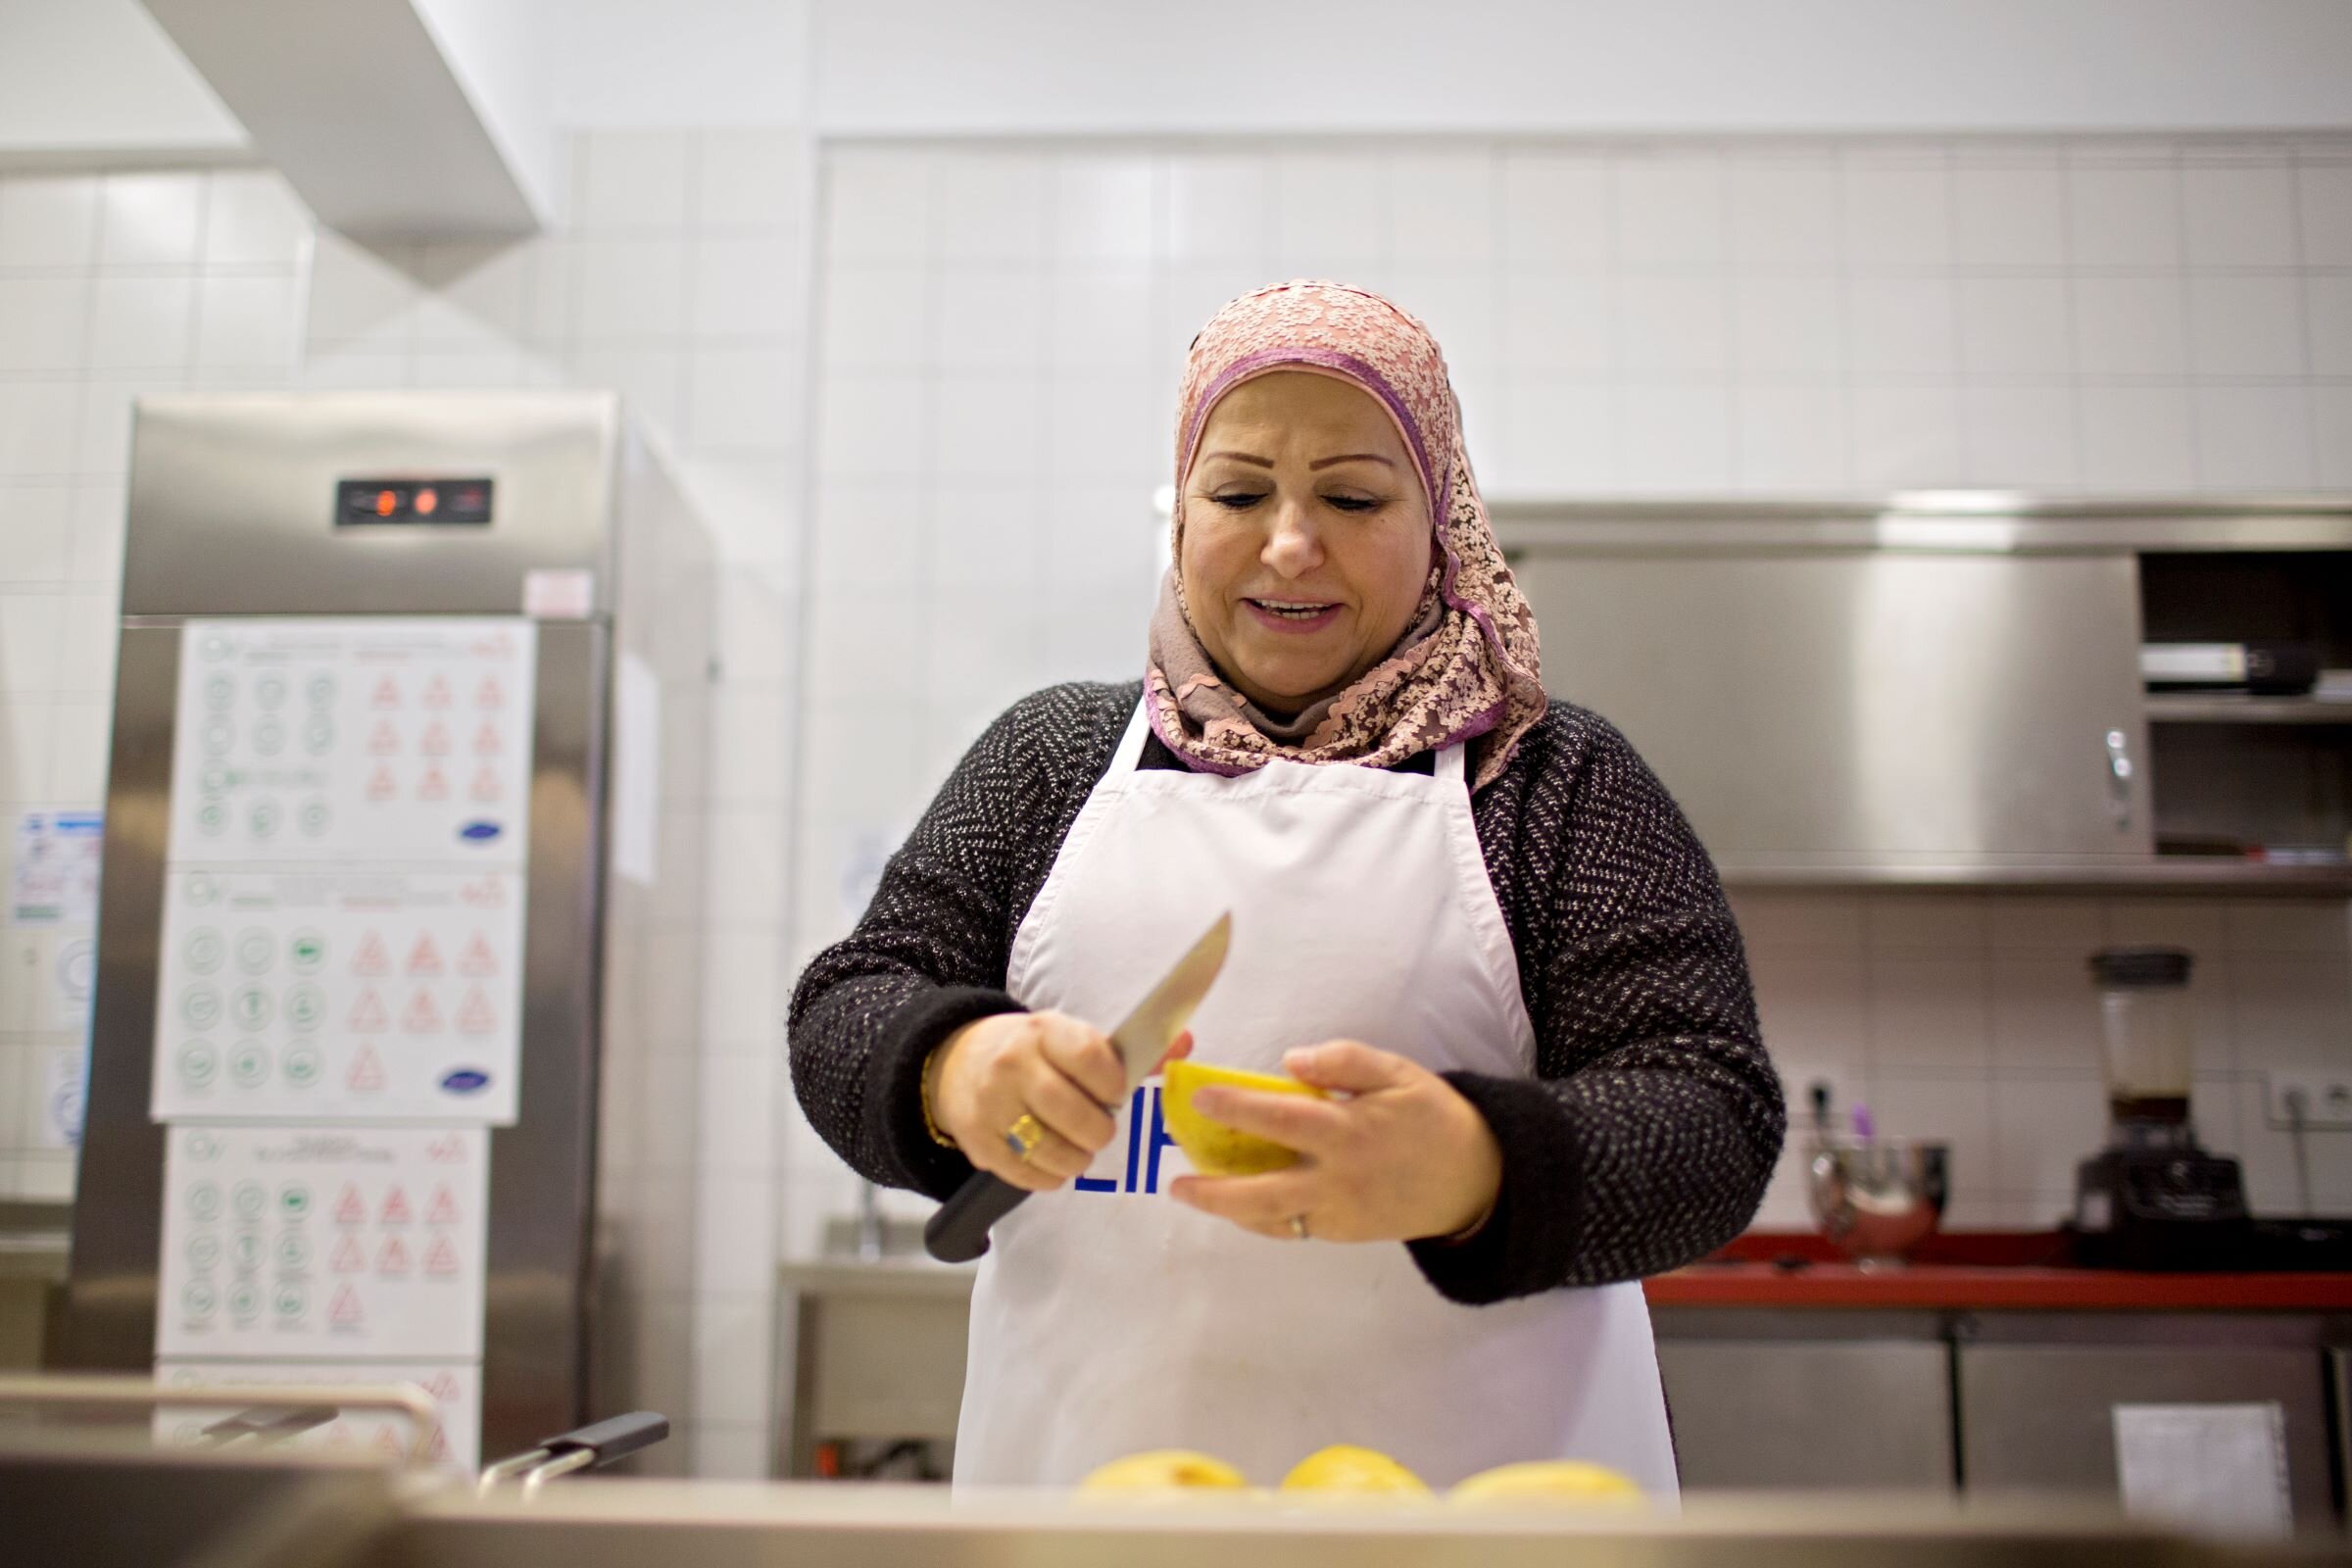 Sawsan prepares Safarjaliyeh, quince and lamb stew, featured in the Cuisine of LIFE cookbook